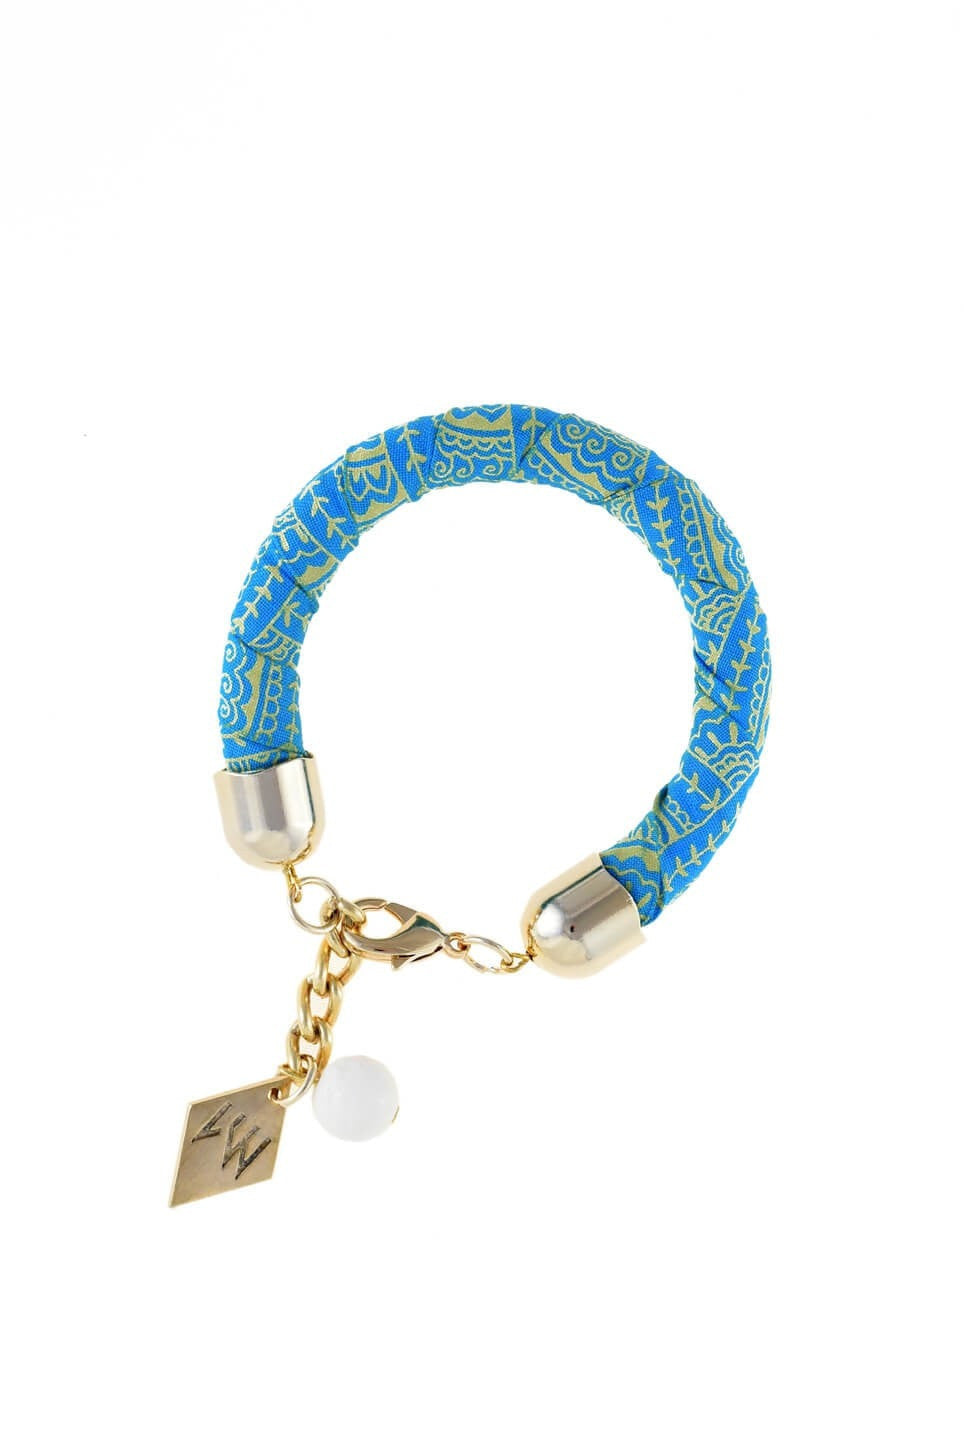 The no. 3 edition of the handcuff pattern bracelet is made of african batik cotton with galvanized metal components and white coral. Gold edition.